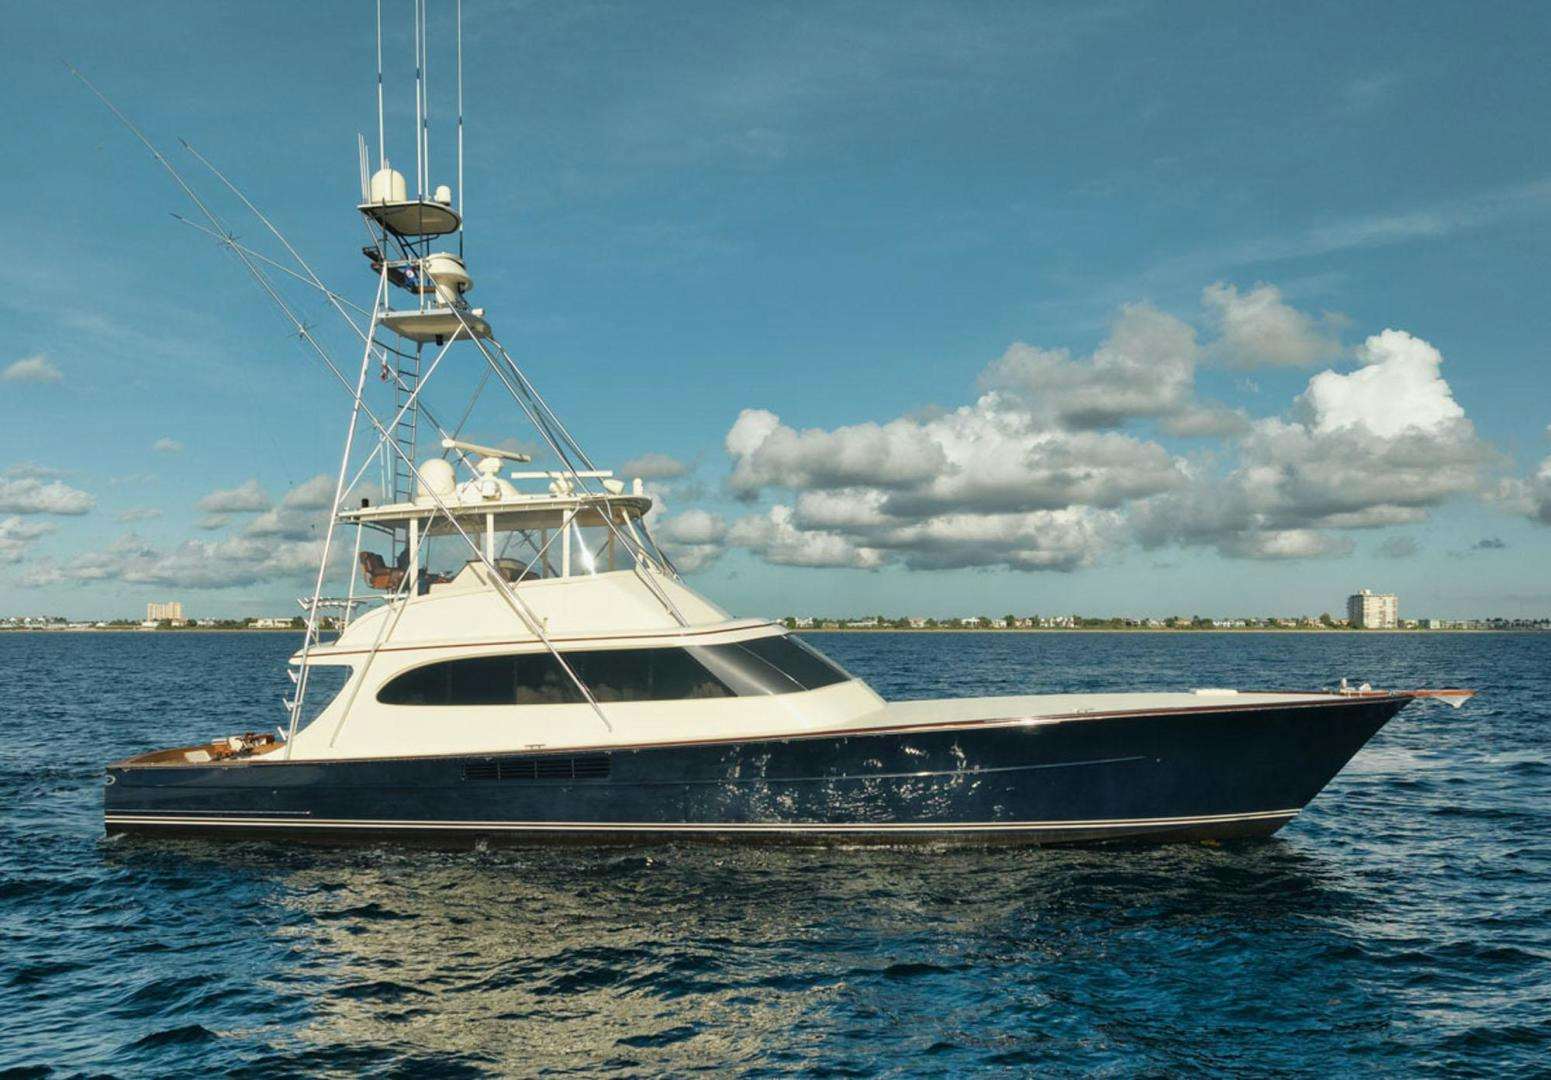 SIR REEL Yacht for Sale in Pompano Beach